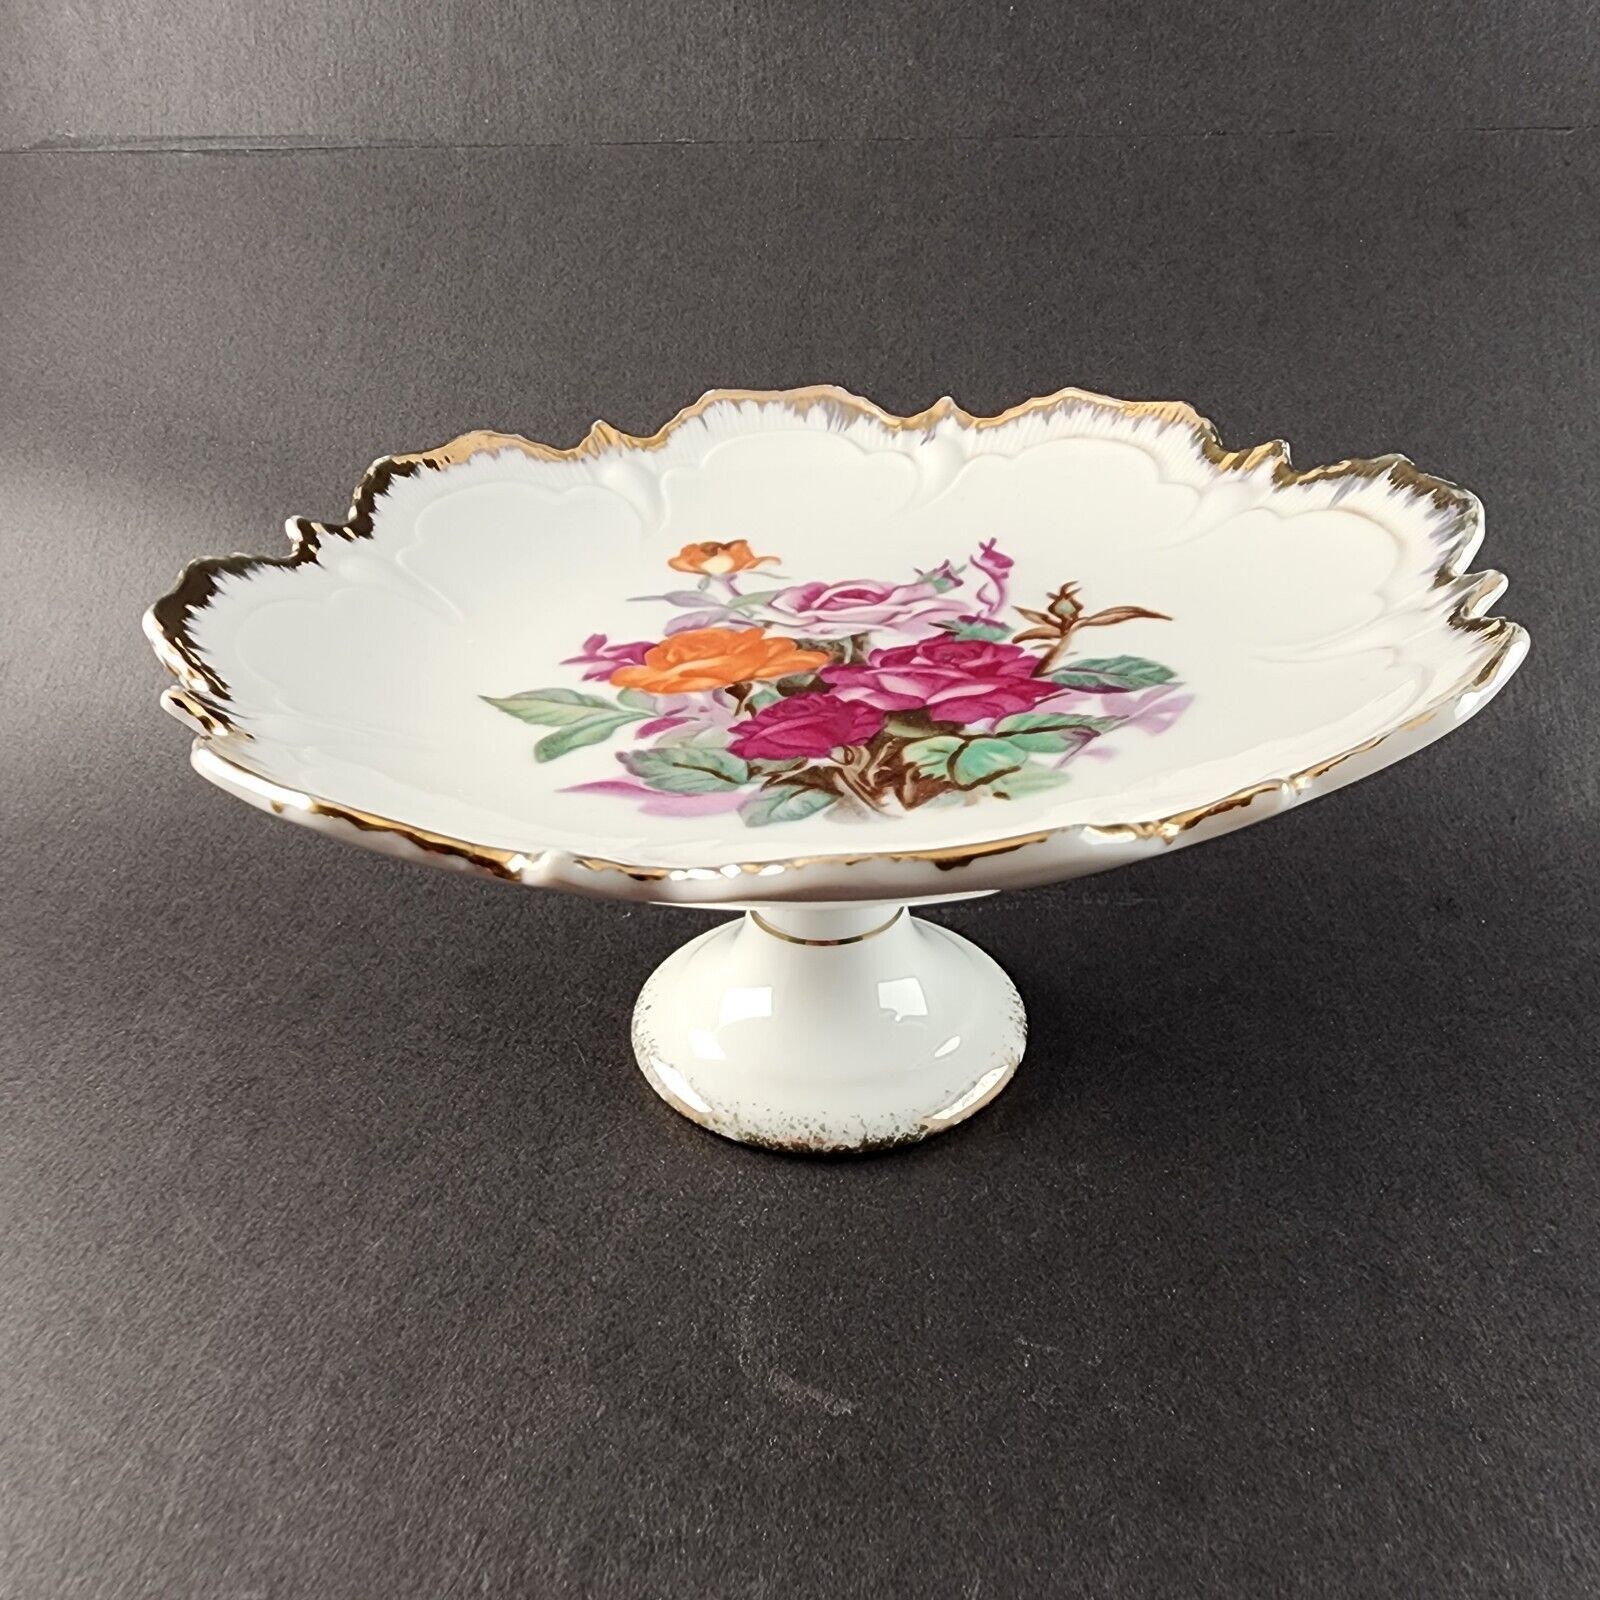 HB Japan White Porcelain Pedestal Dish Compote Hand Painted Roses Gold Trim 3471